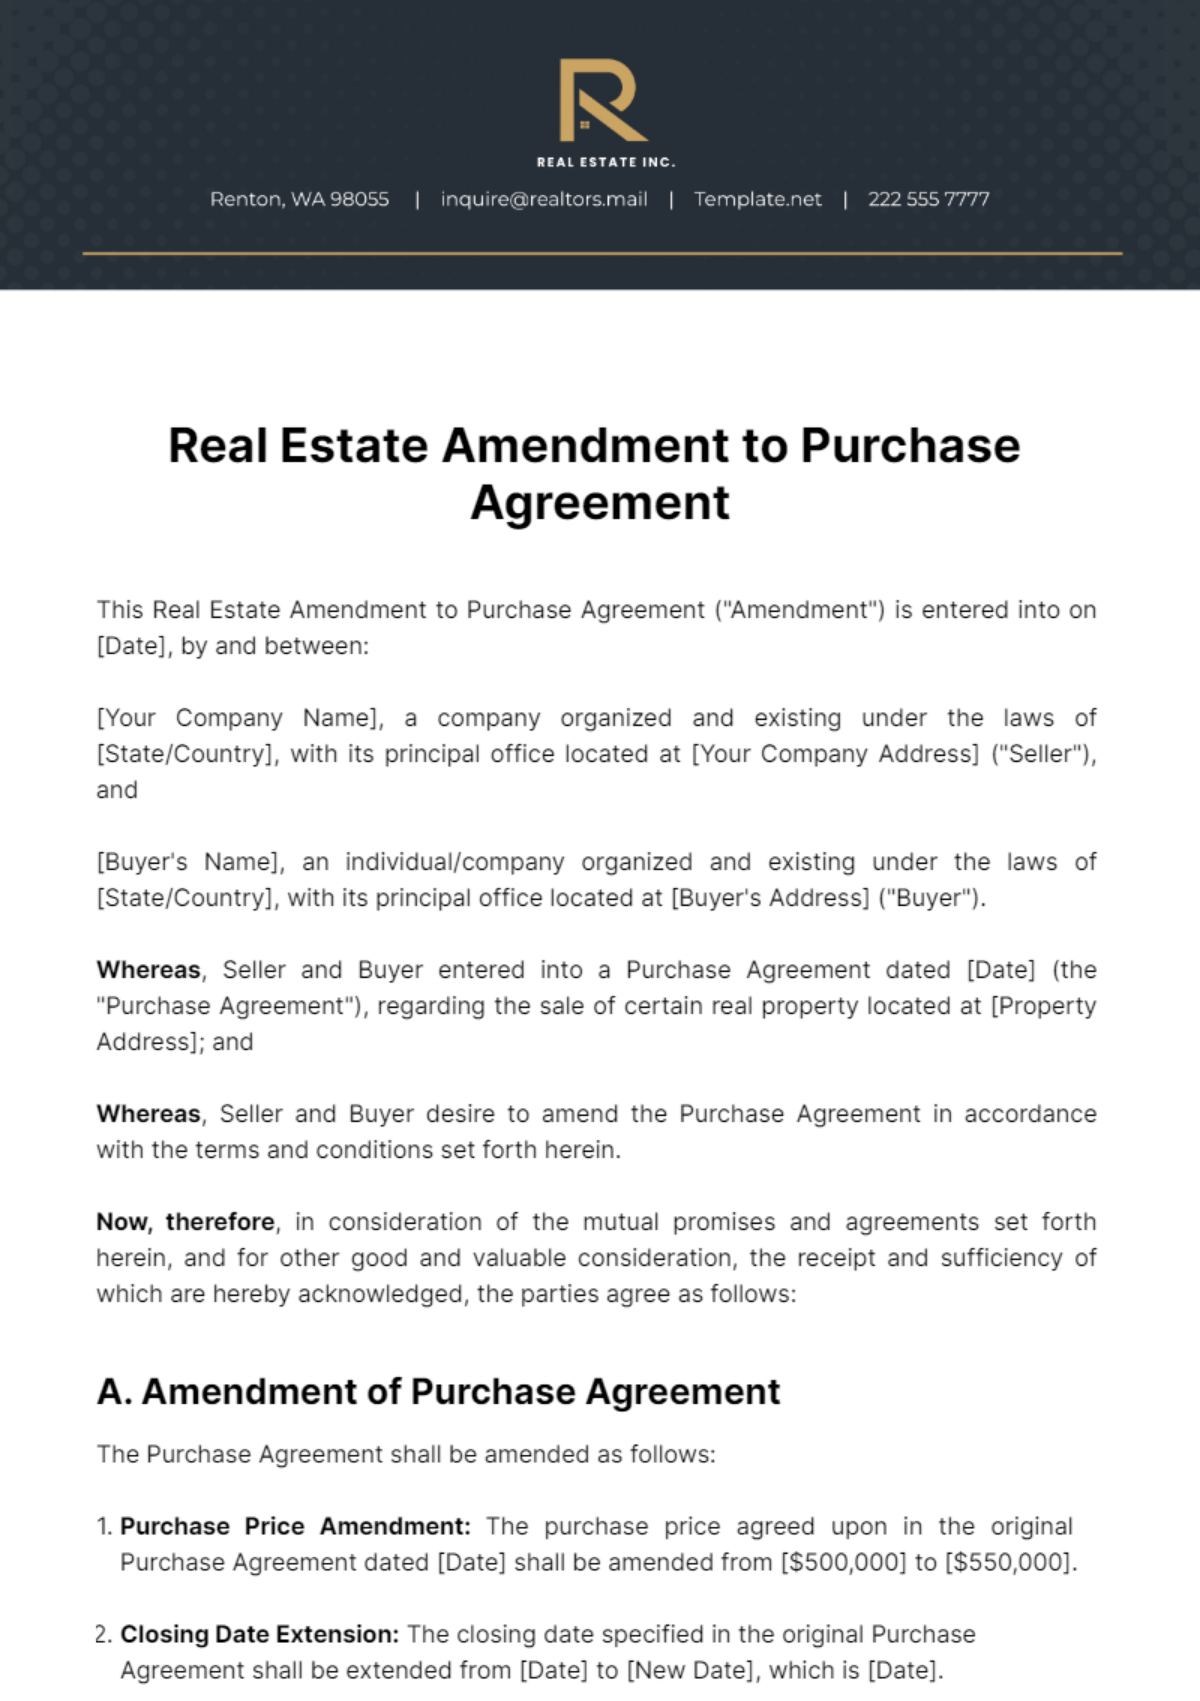 Real Estate Amendment to Purchase Agreement Template